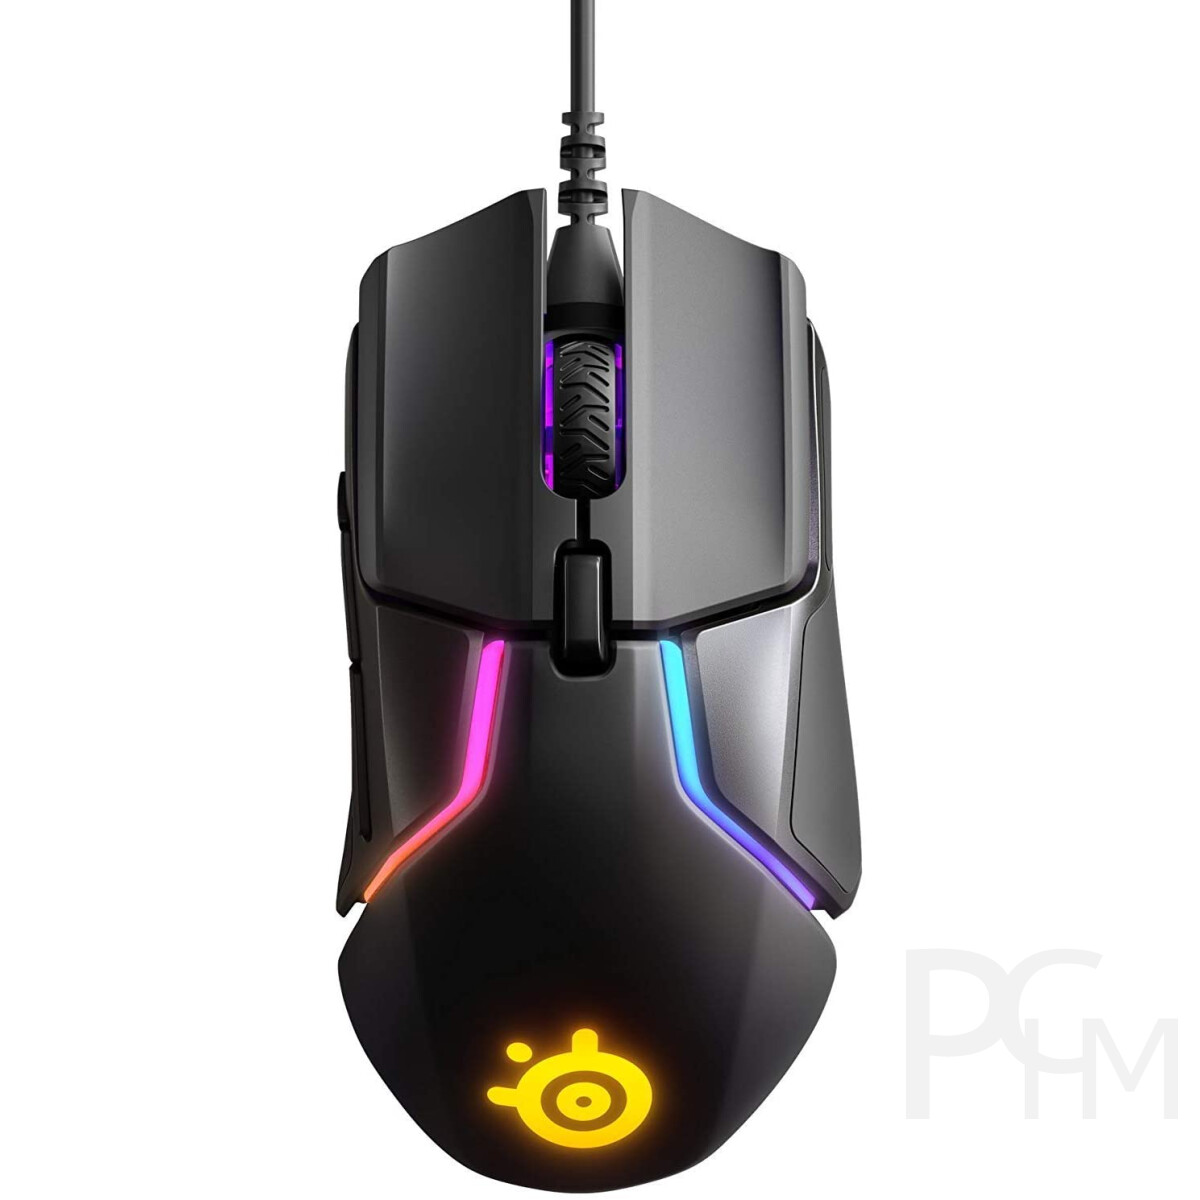 PCHM, Rival - DPI Gaming Maus € - 79,99 600 SteelSeries 12.000